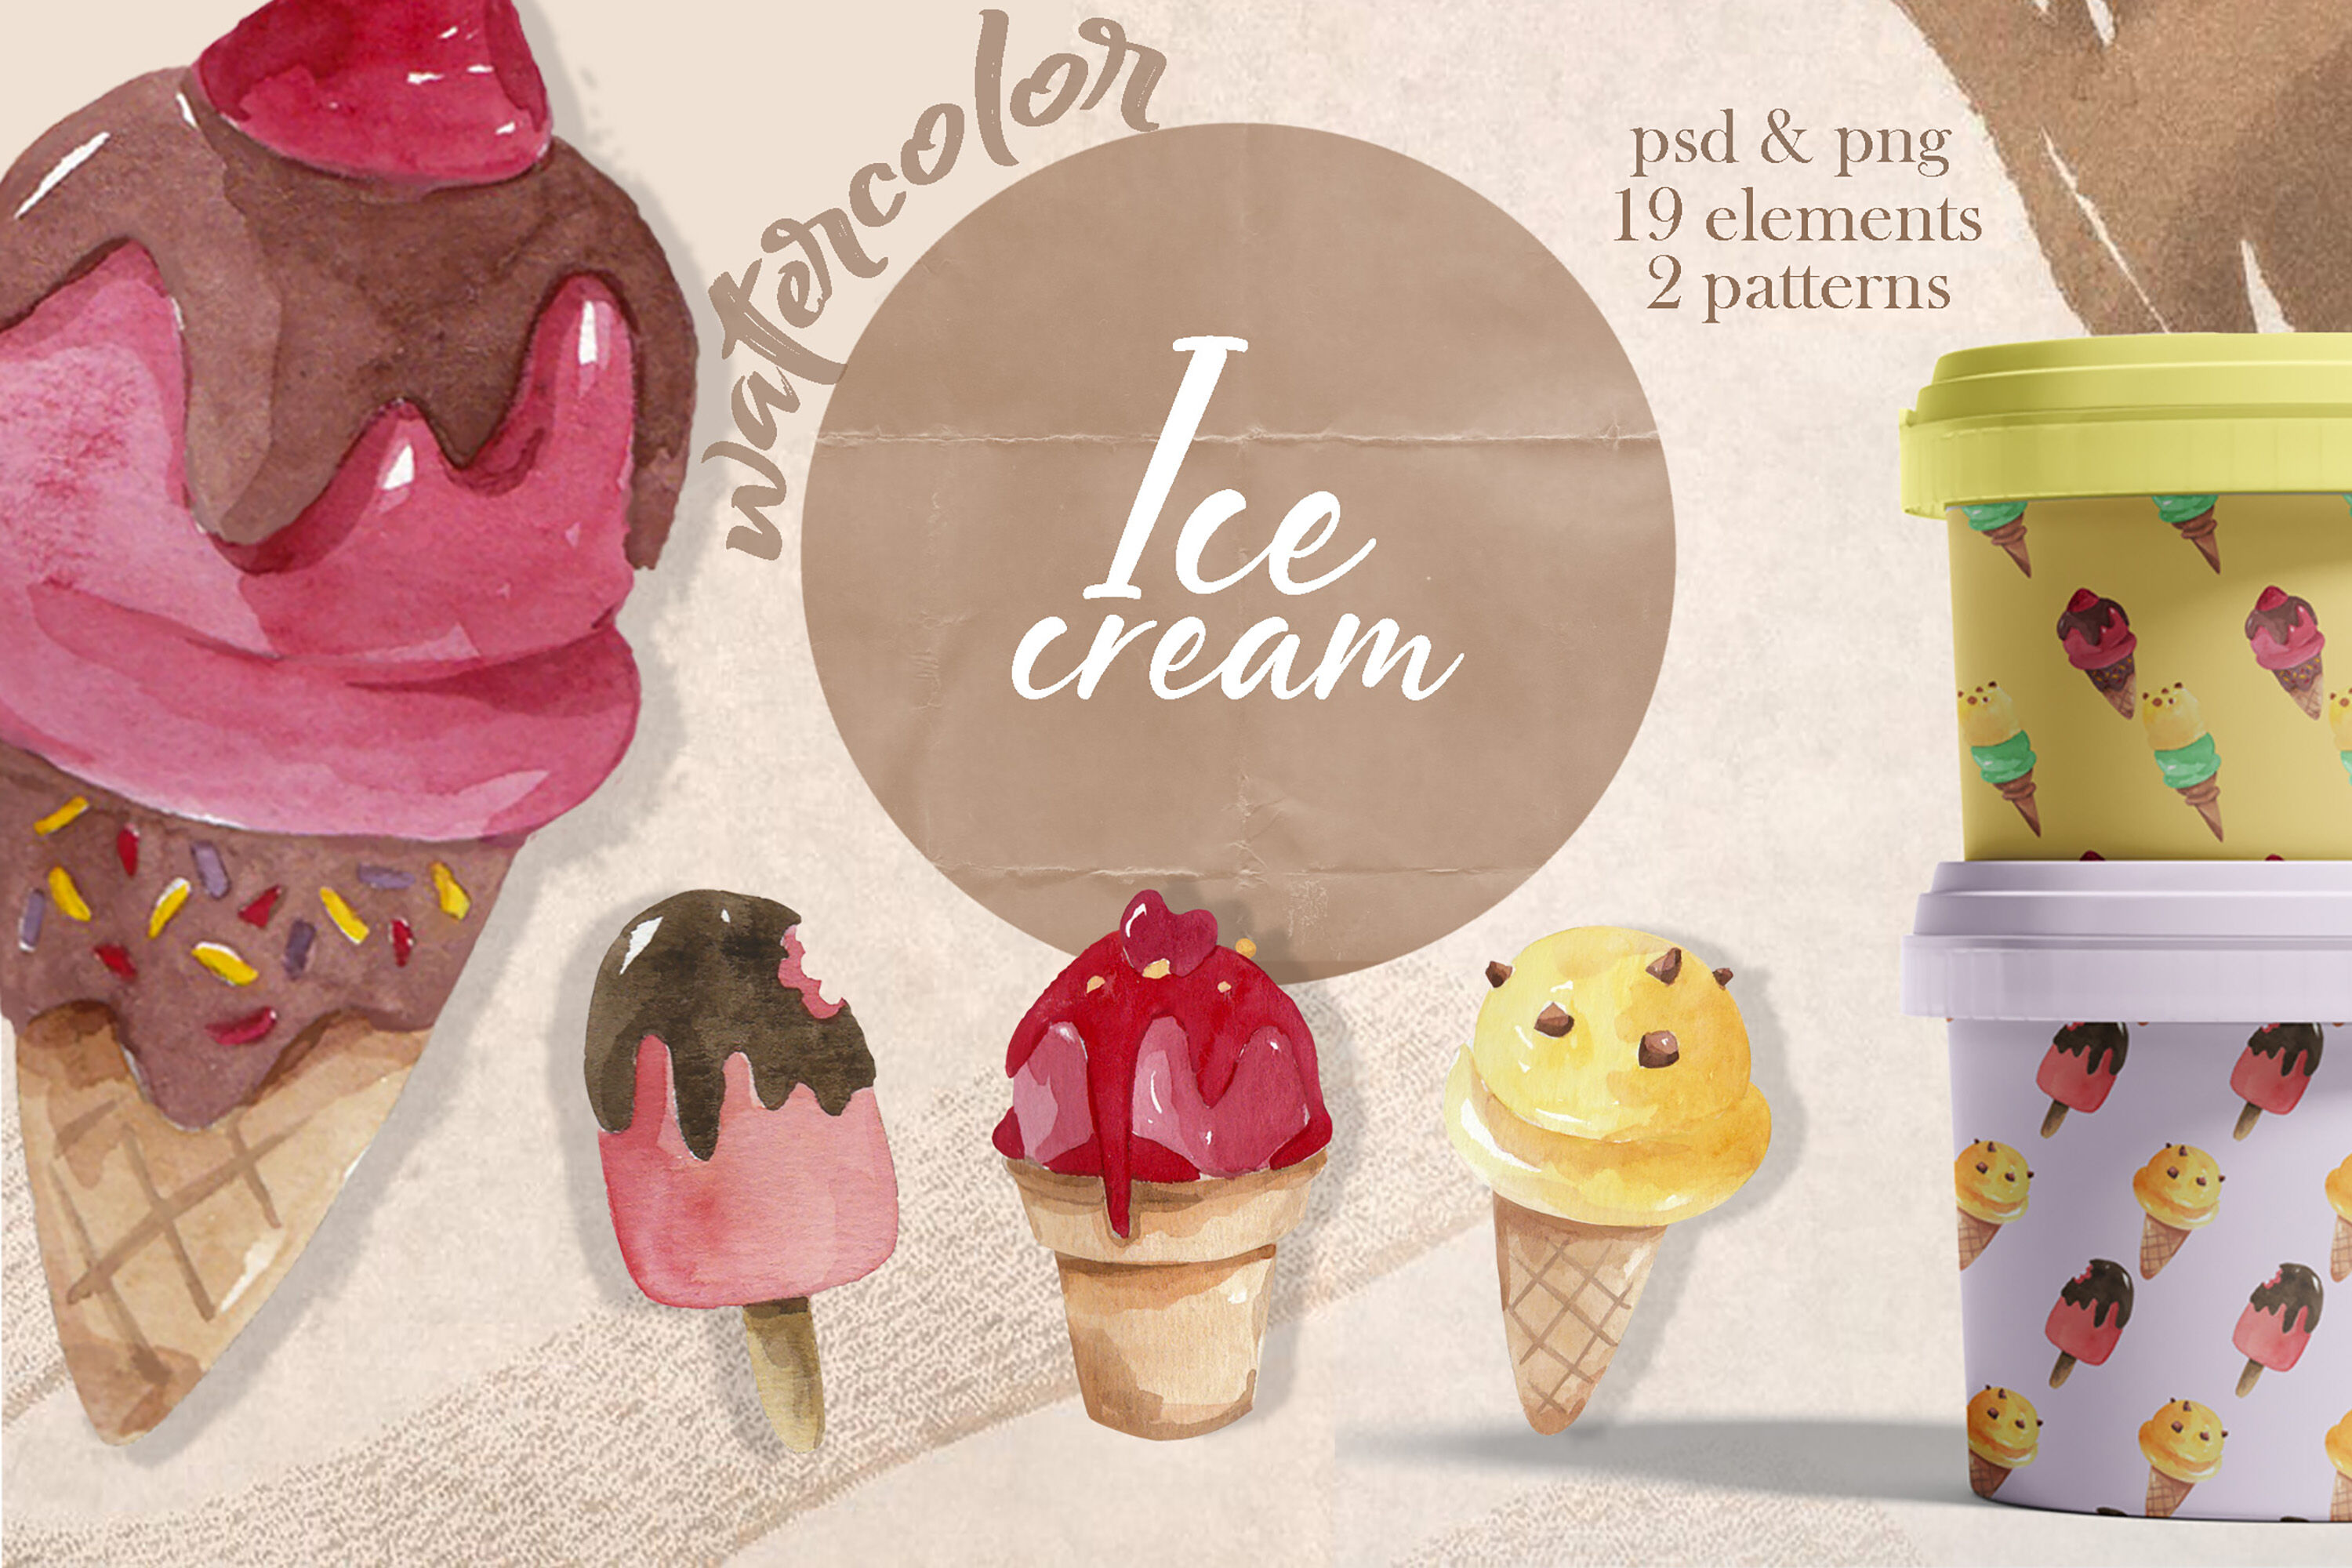 Download Ice Cream Cone Mockup Free Mockups Psd Template Design Assets PSD Mockup Templates